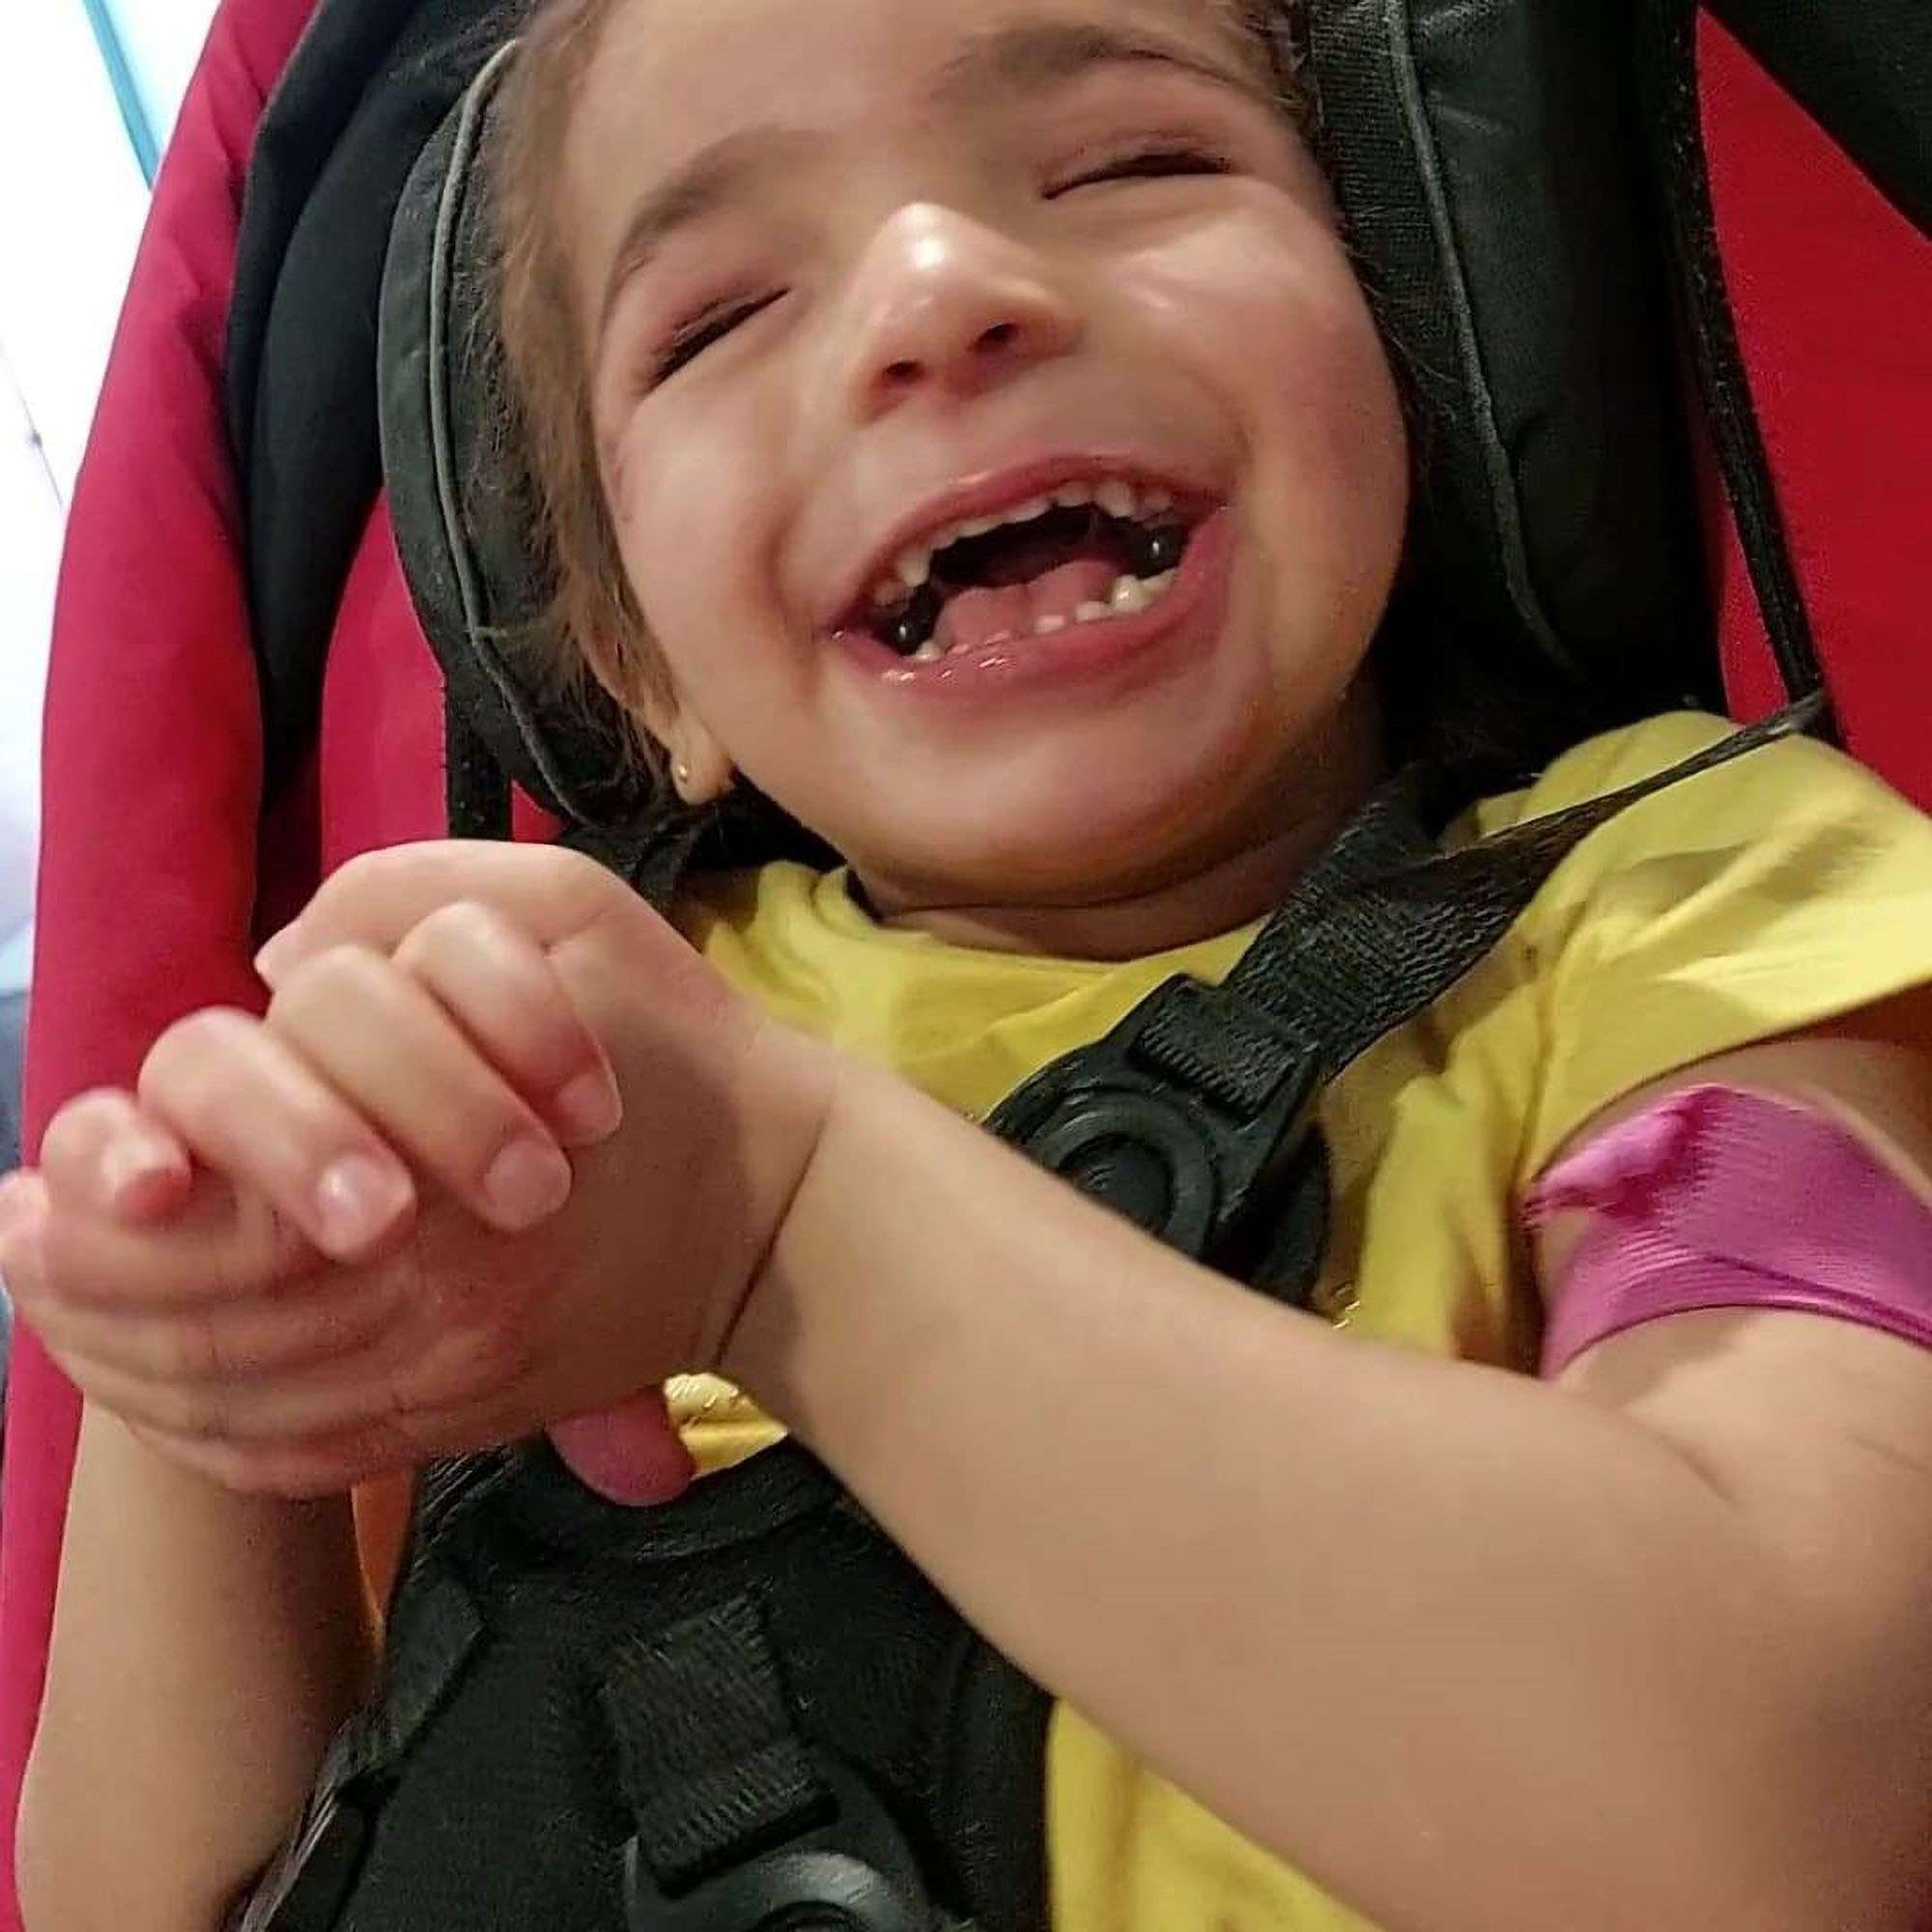 Read more about the article YOUNG GIRL’S TRAGEDY: Four-Year-Old Child Made Blind, Deaf And In Constant Pain From Rare Unknown Disease